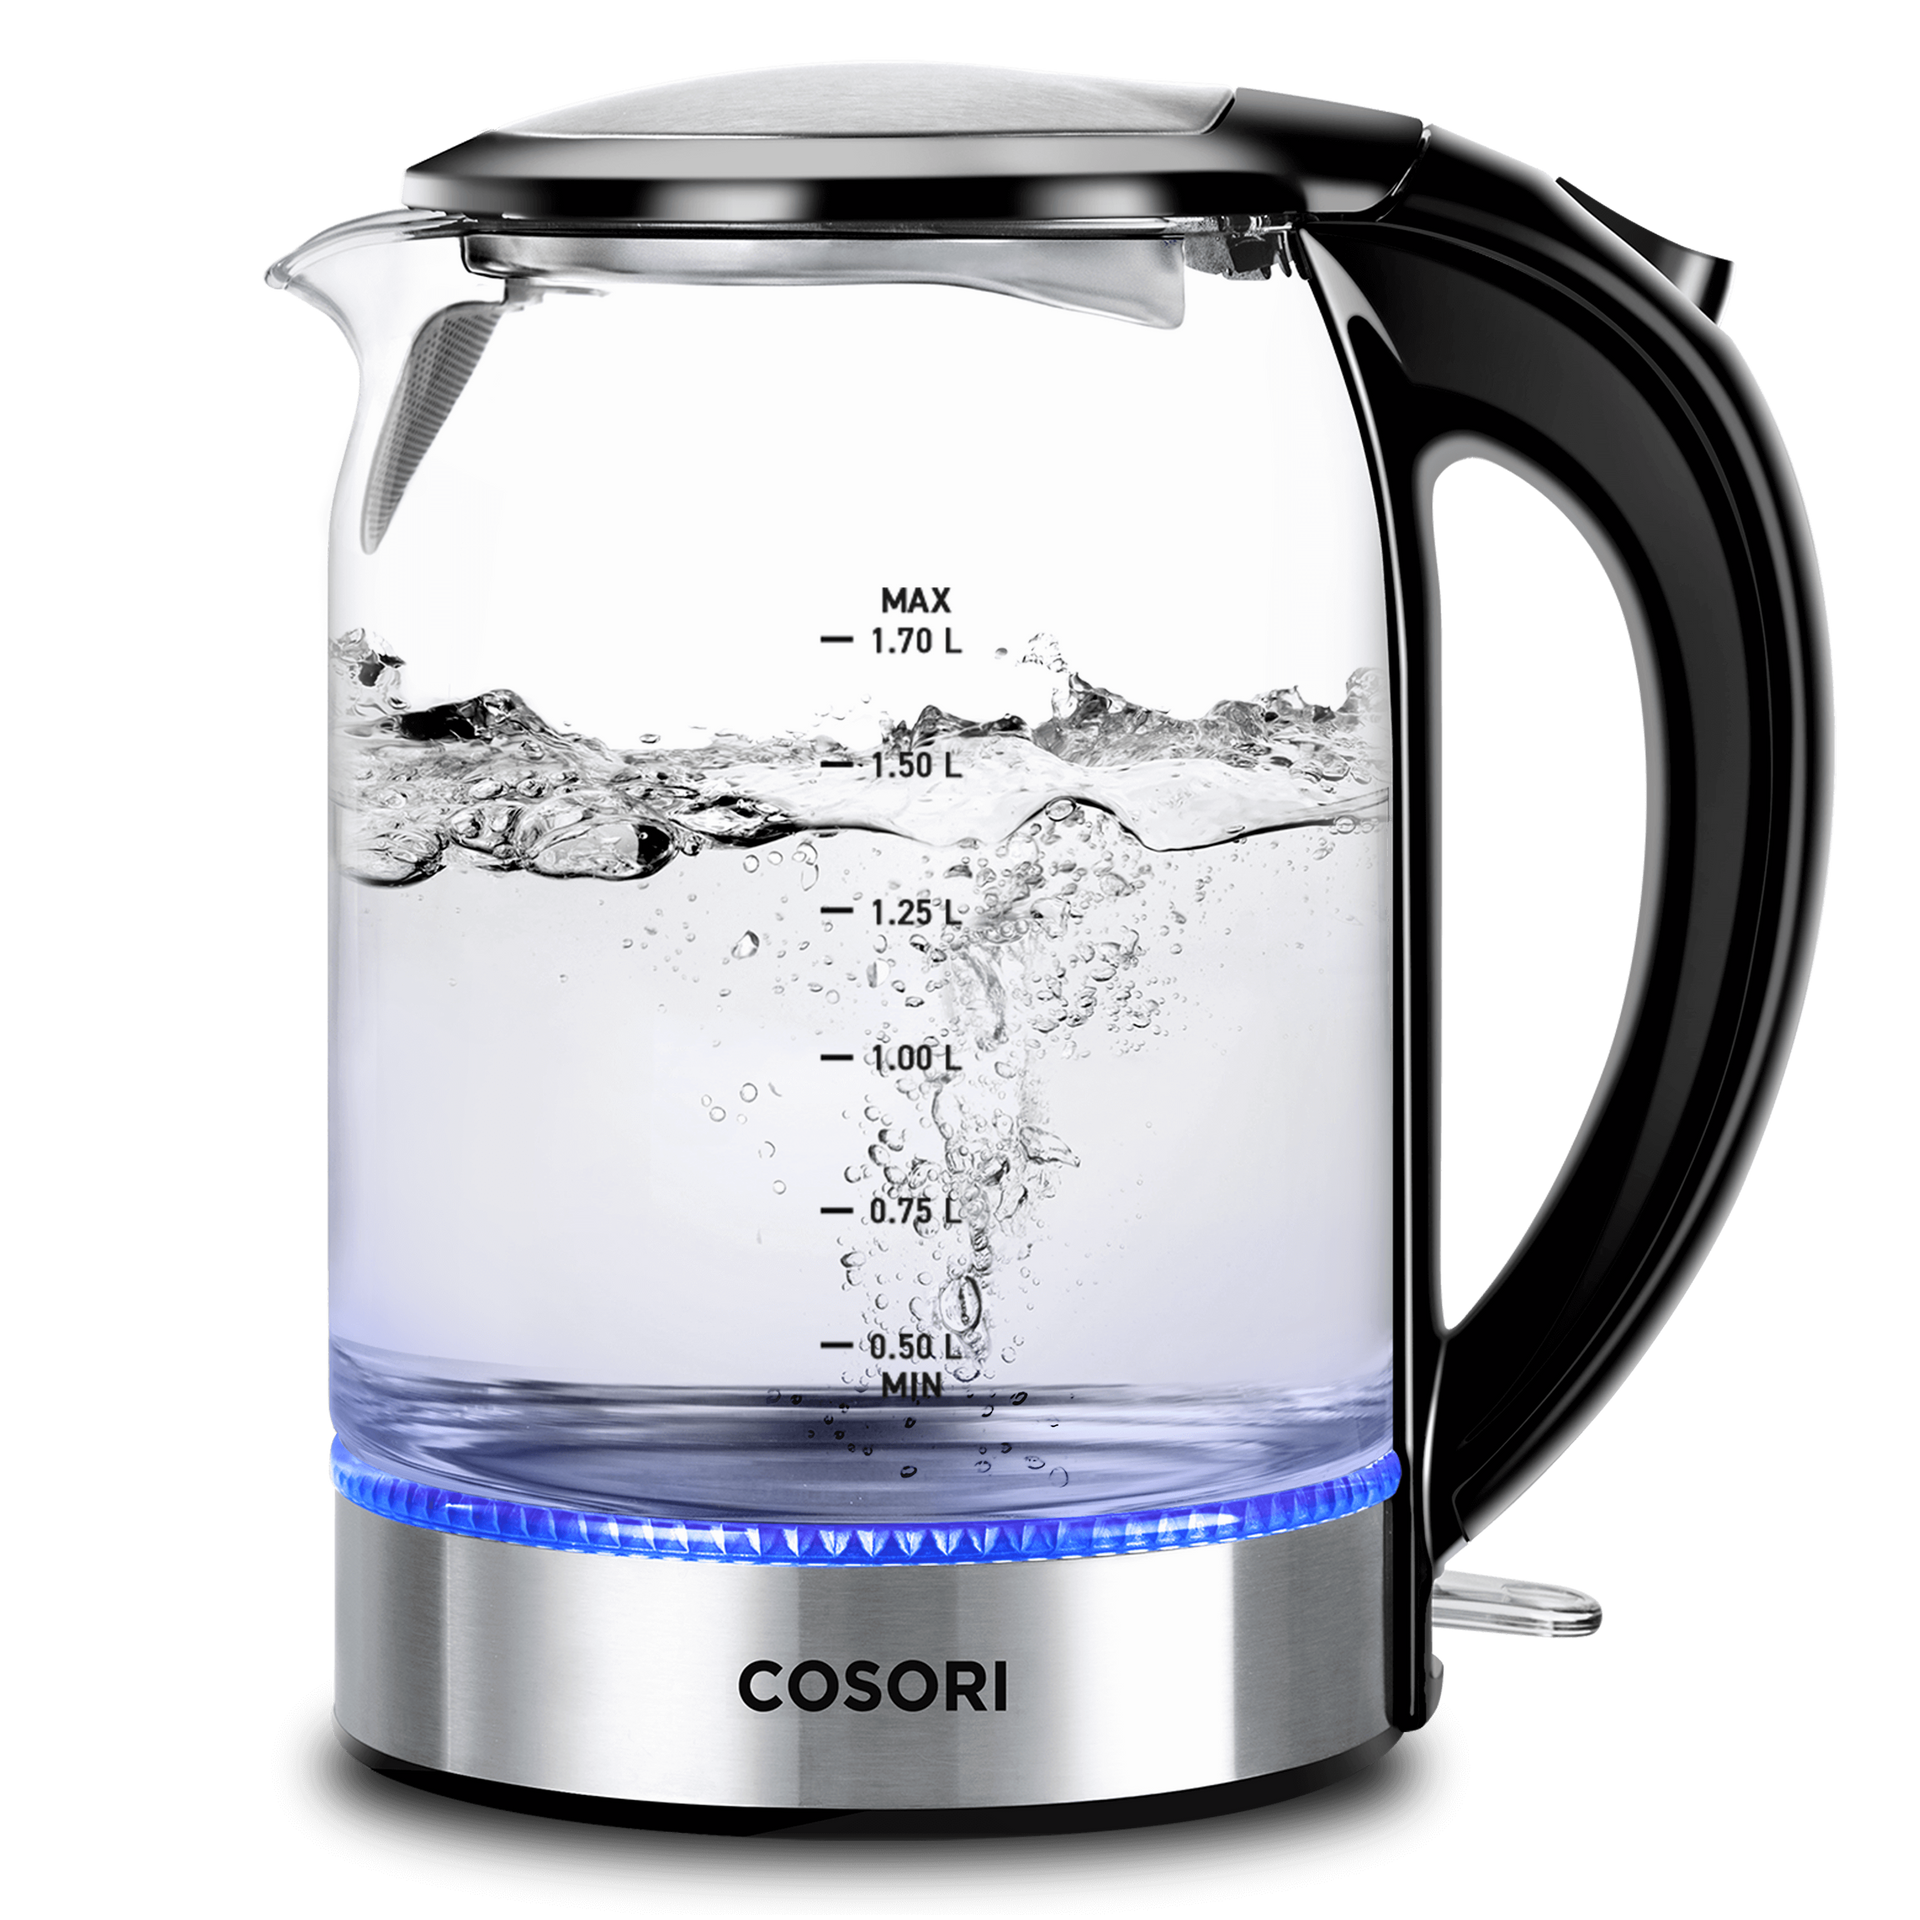 ASCOT 1.7L Glass Kettle Electric Stainless Steel Review 